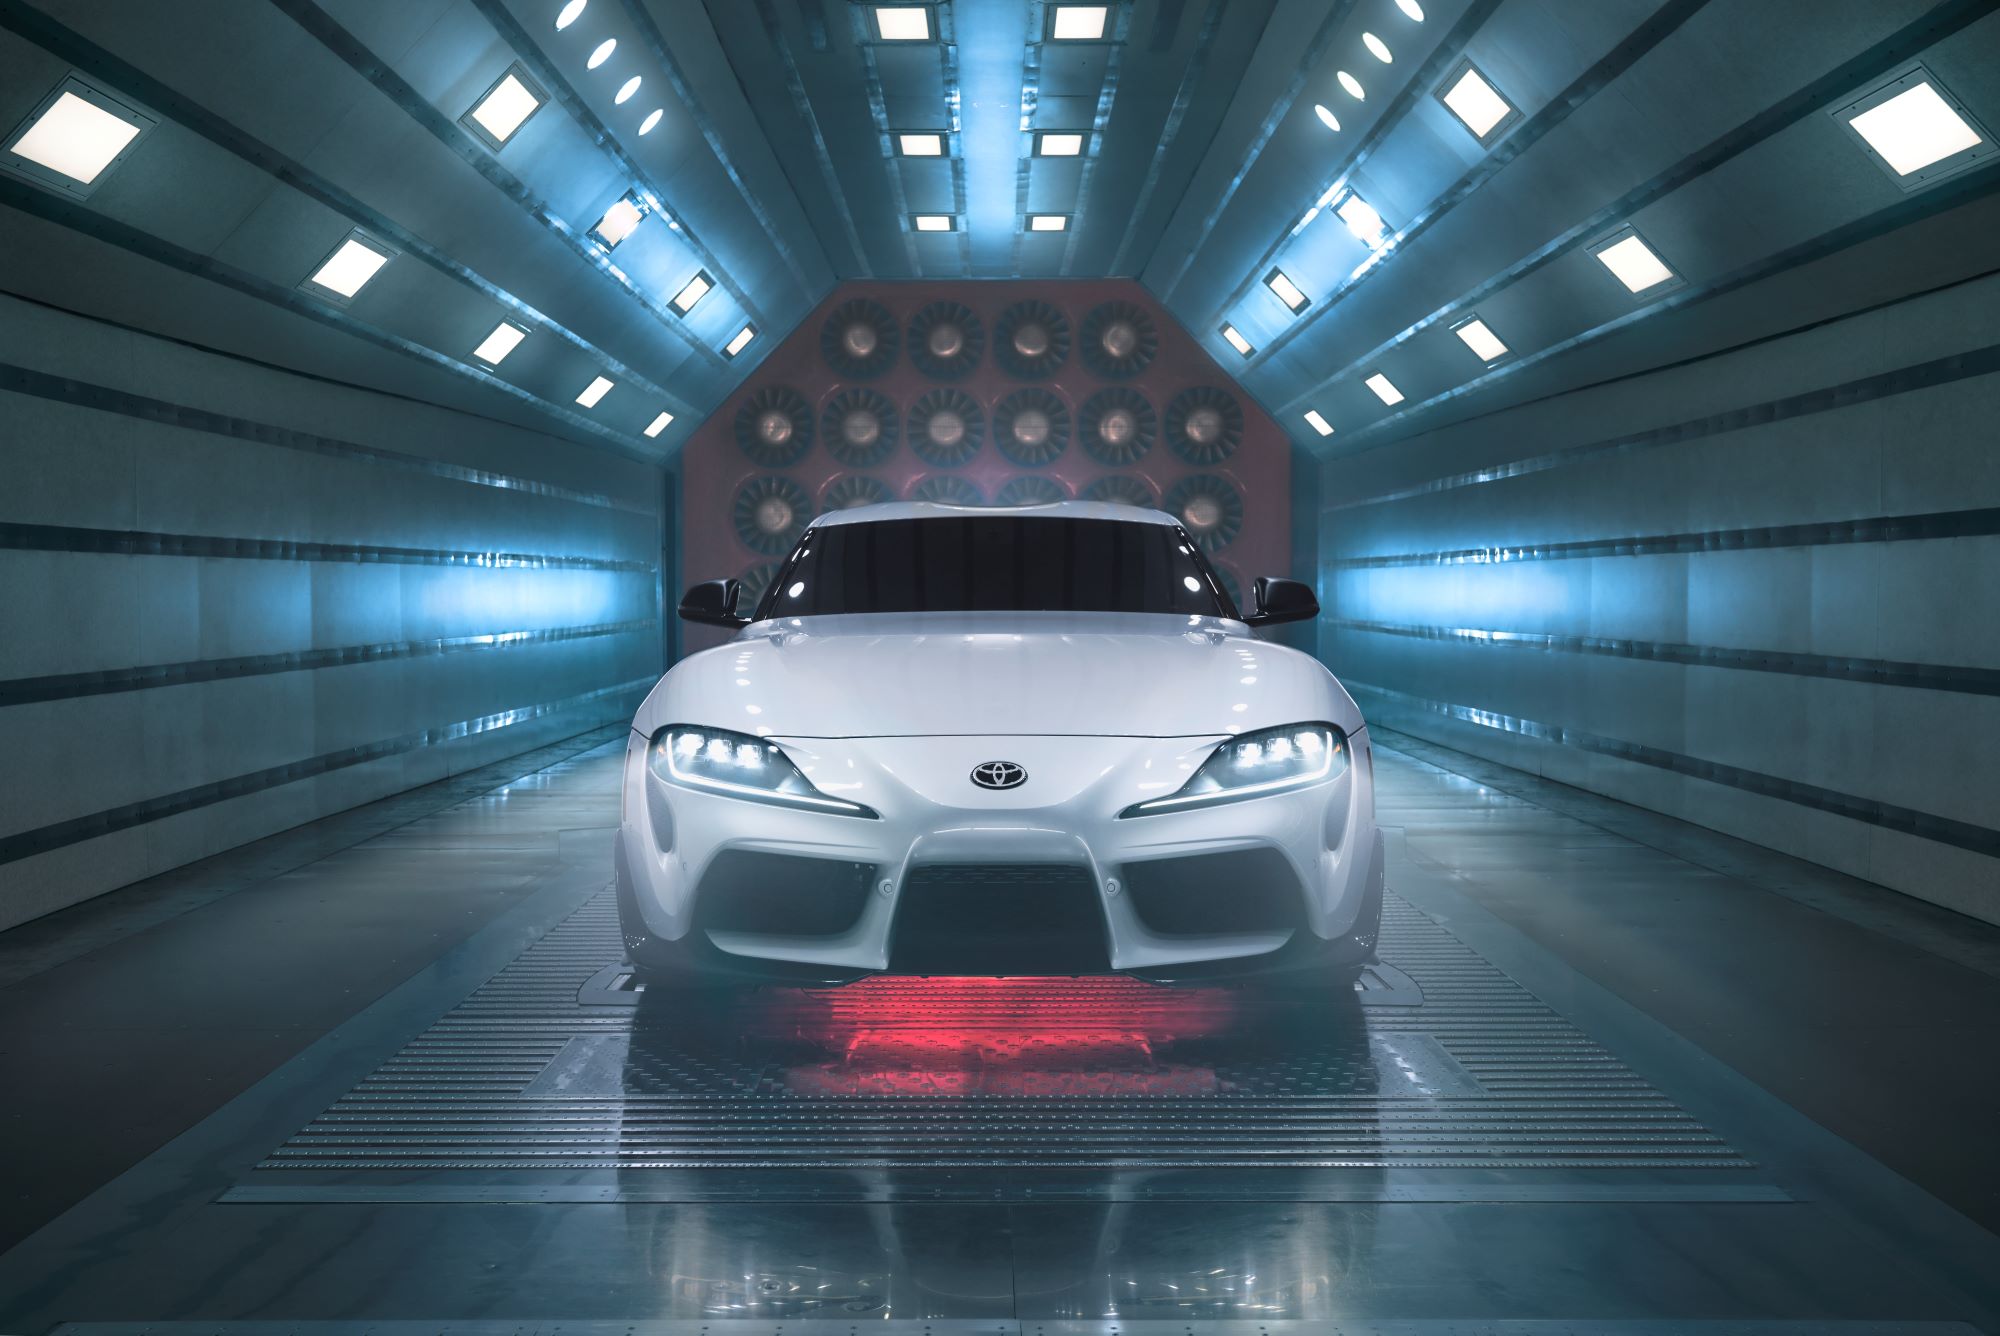 A silver 2022 Toyota Supra in a wind tunnel with lights.